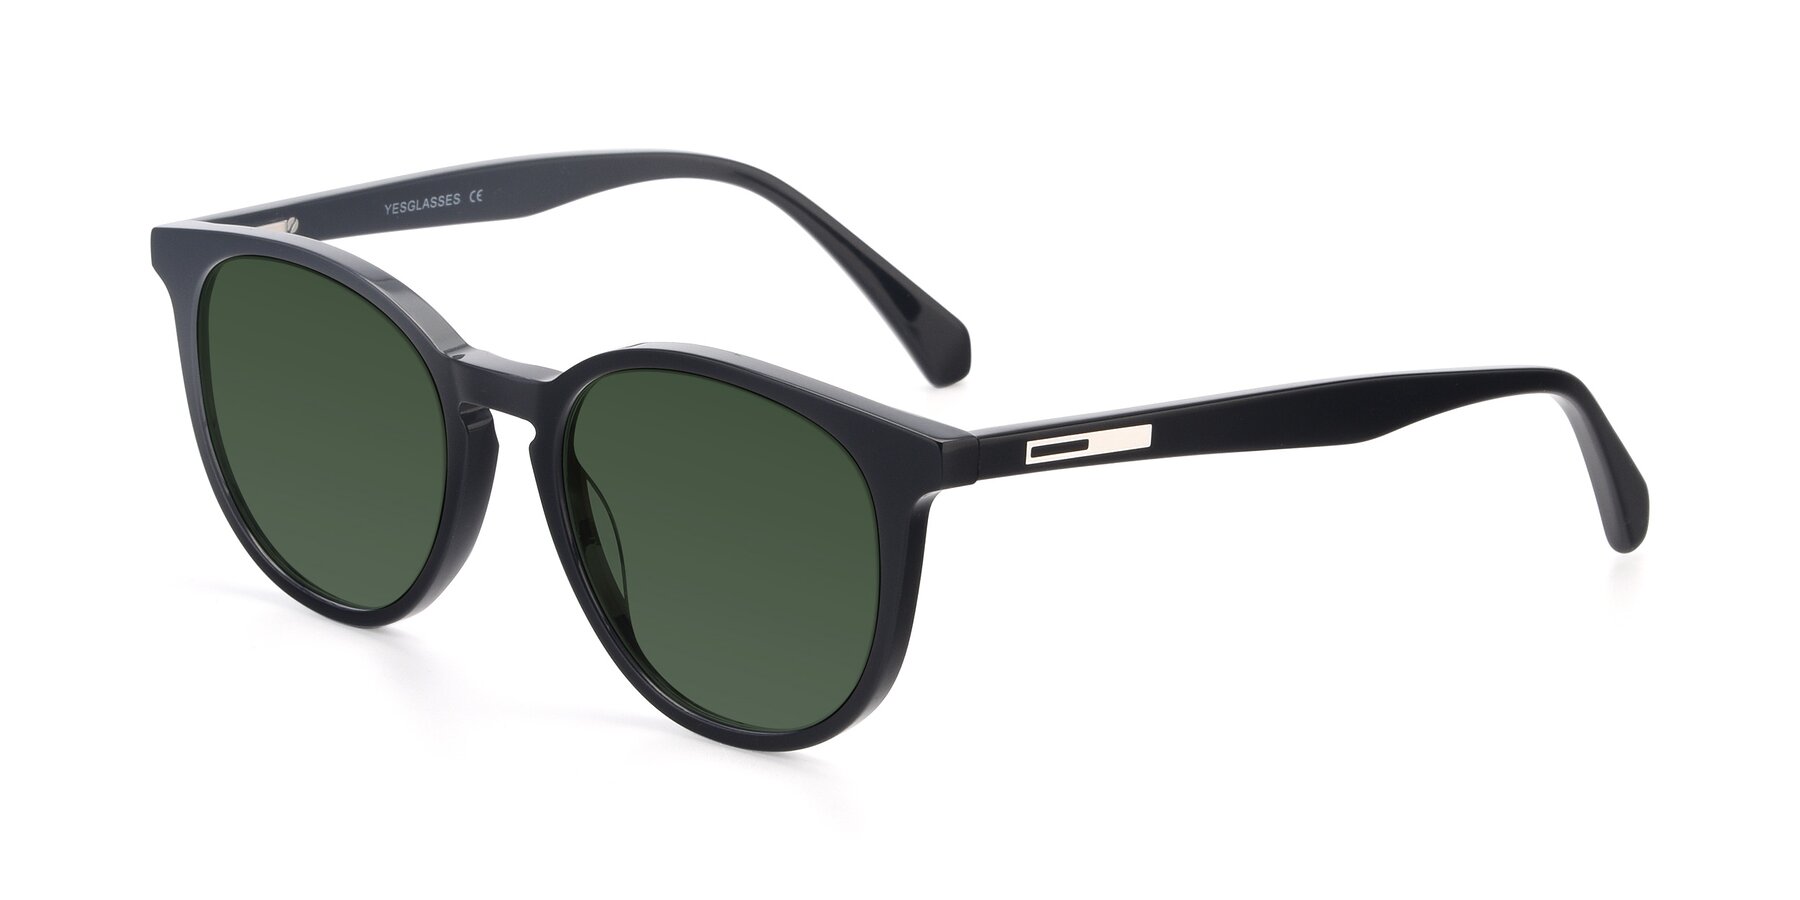 Angle of 17721 in Black with Green Tinted Lenses